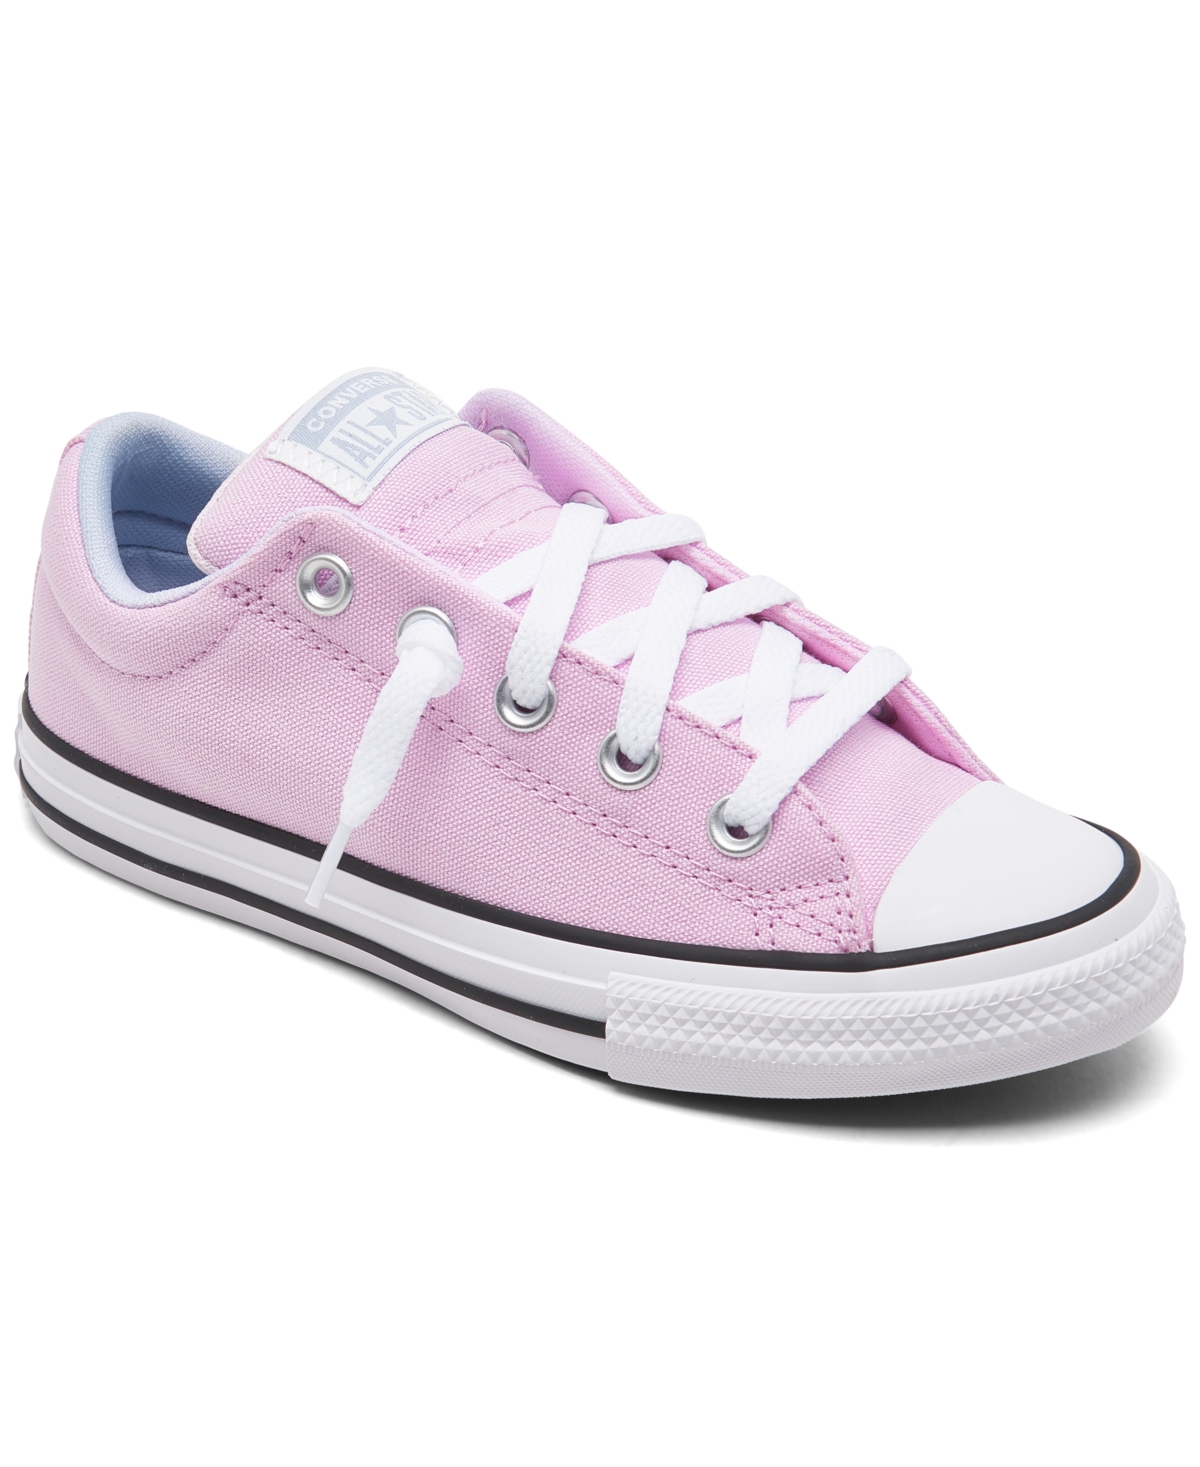 Converse Little Girls' Street Low Casual Sneakers From Finish Line In Stardust Lilac,white